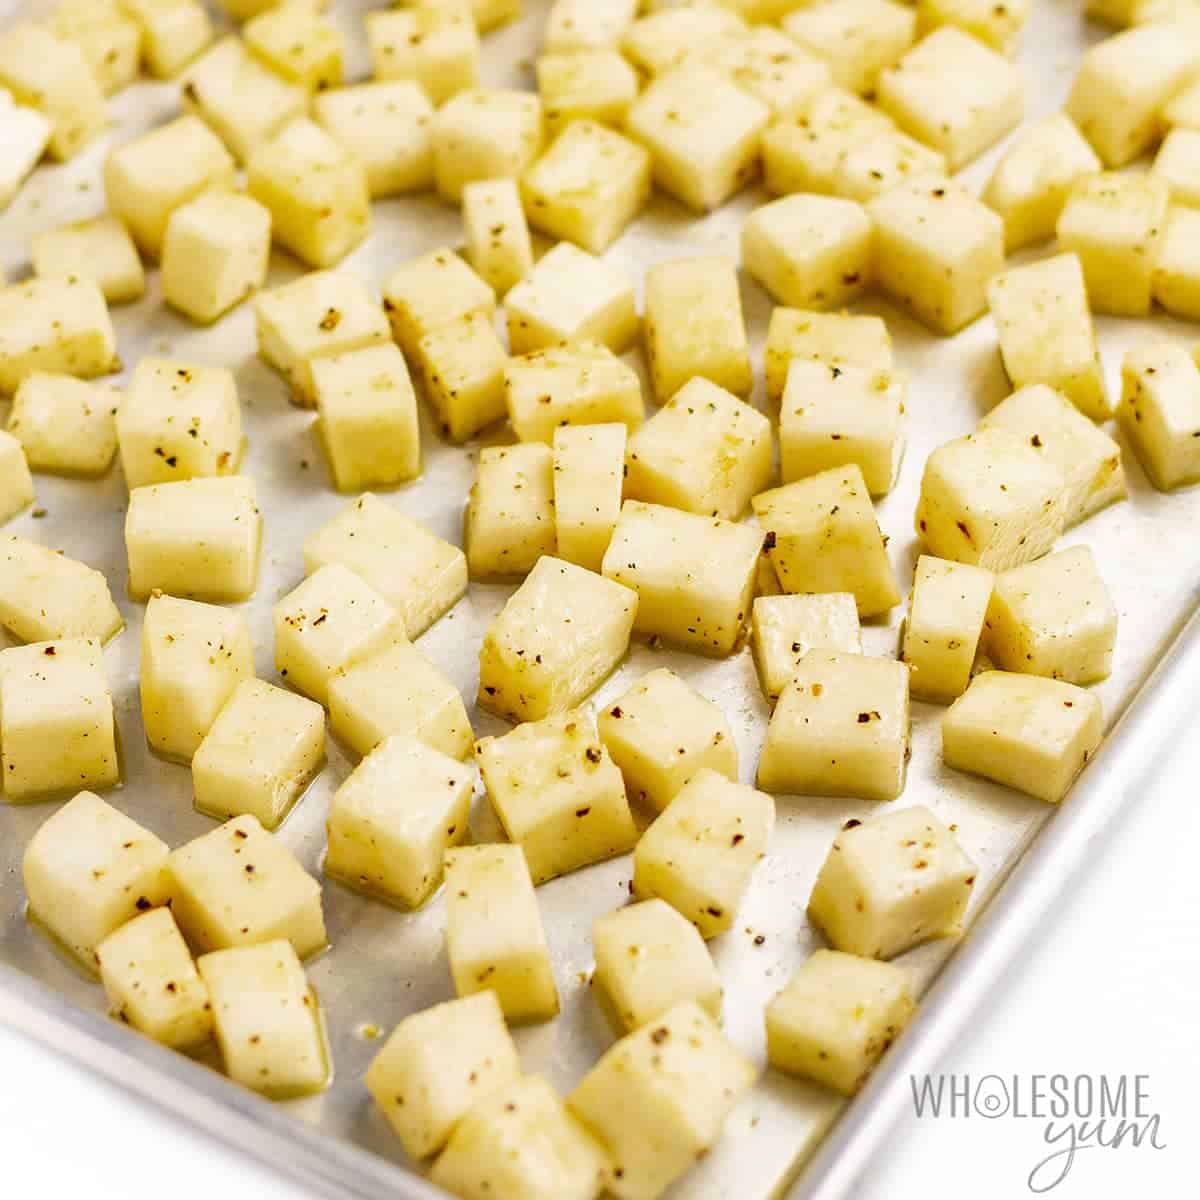 Cubed swedes on a sheet pan